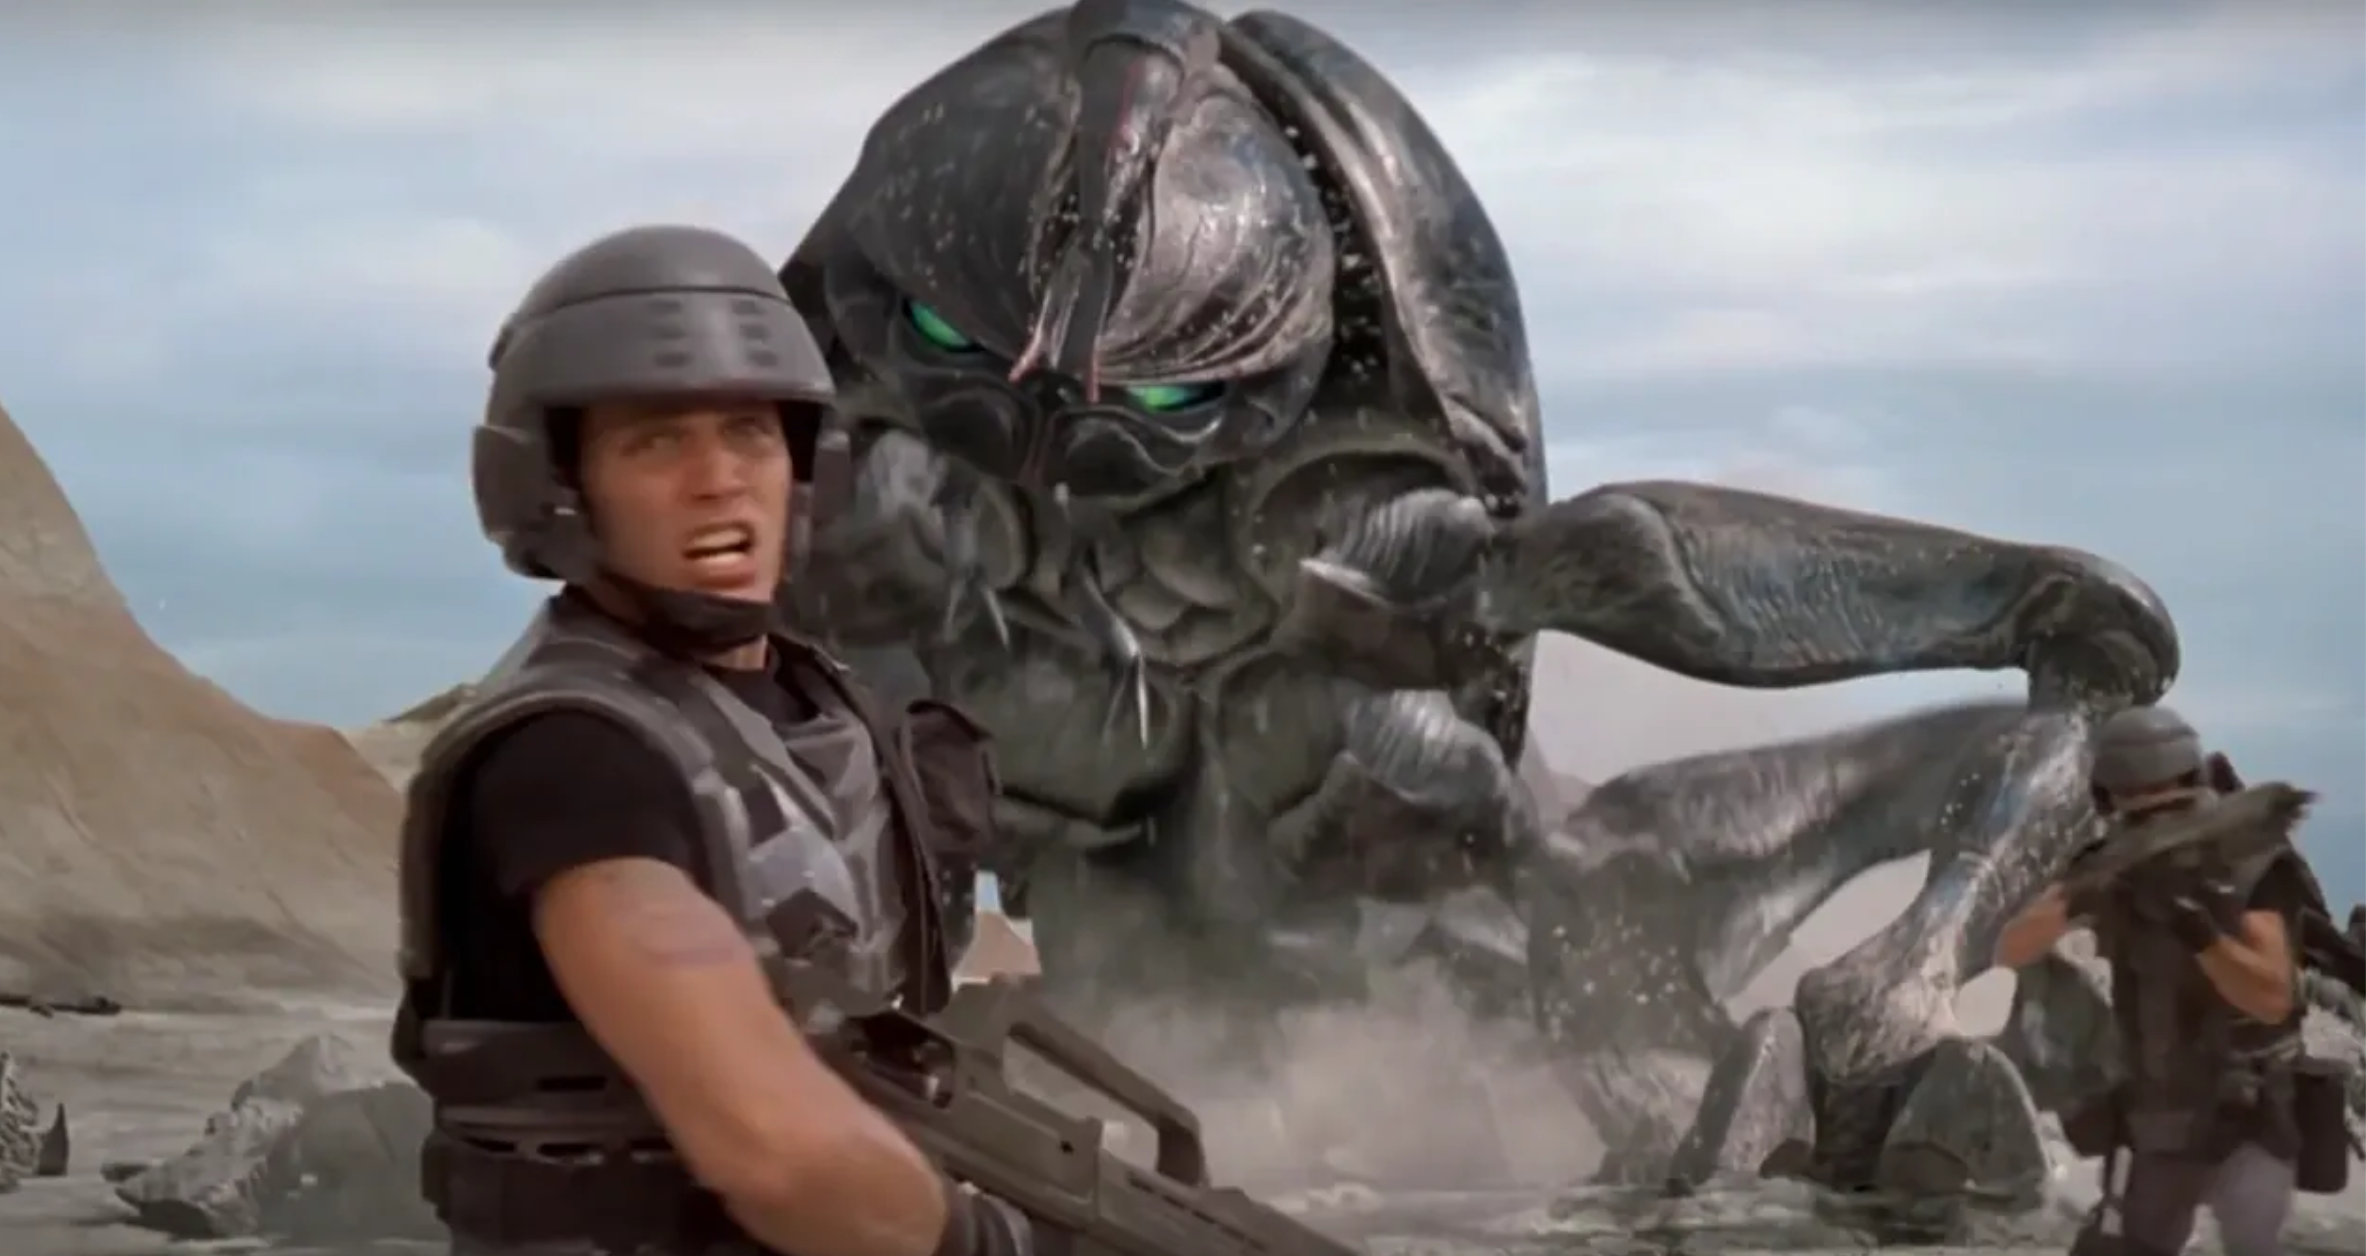 Starship Troopers bugs